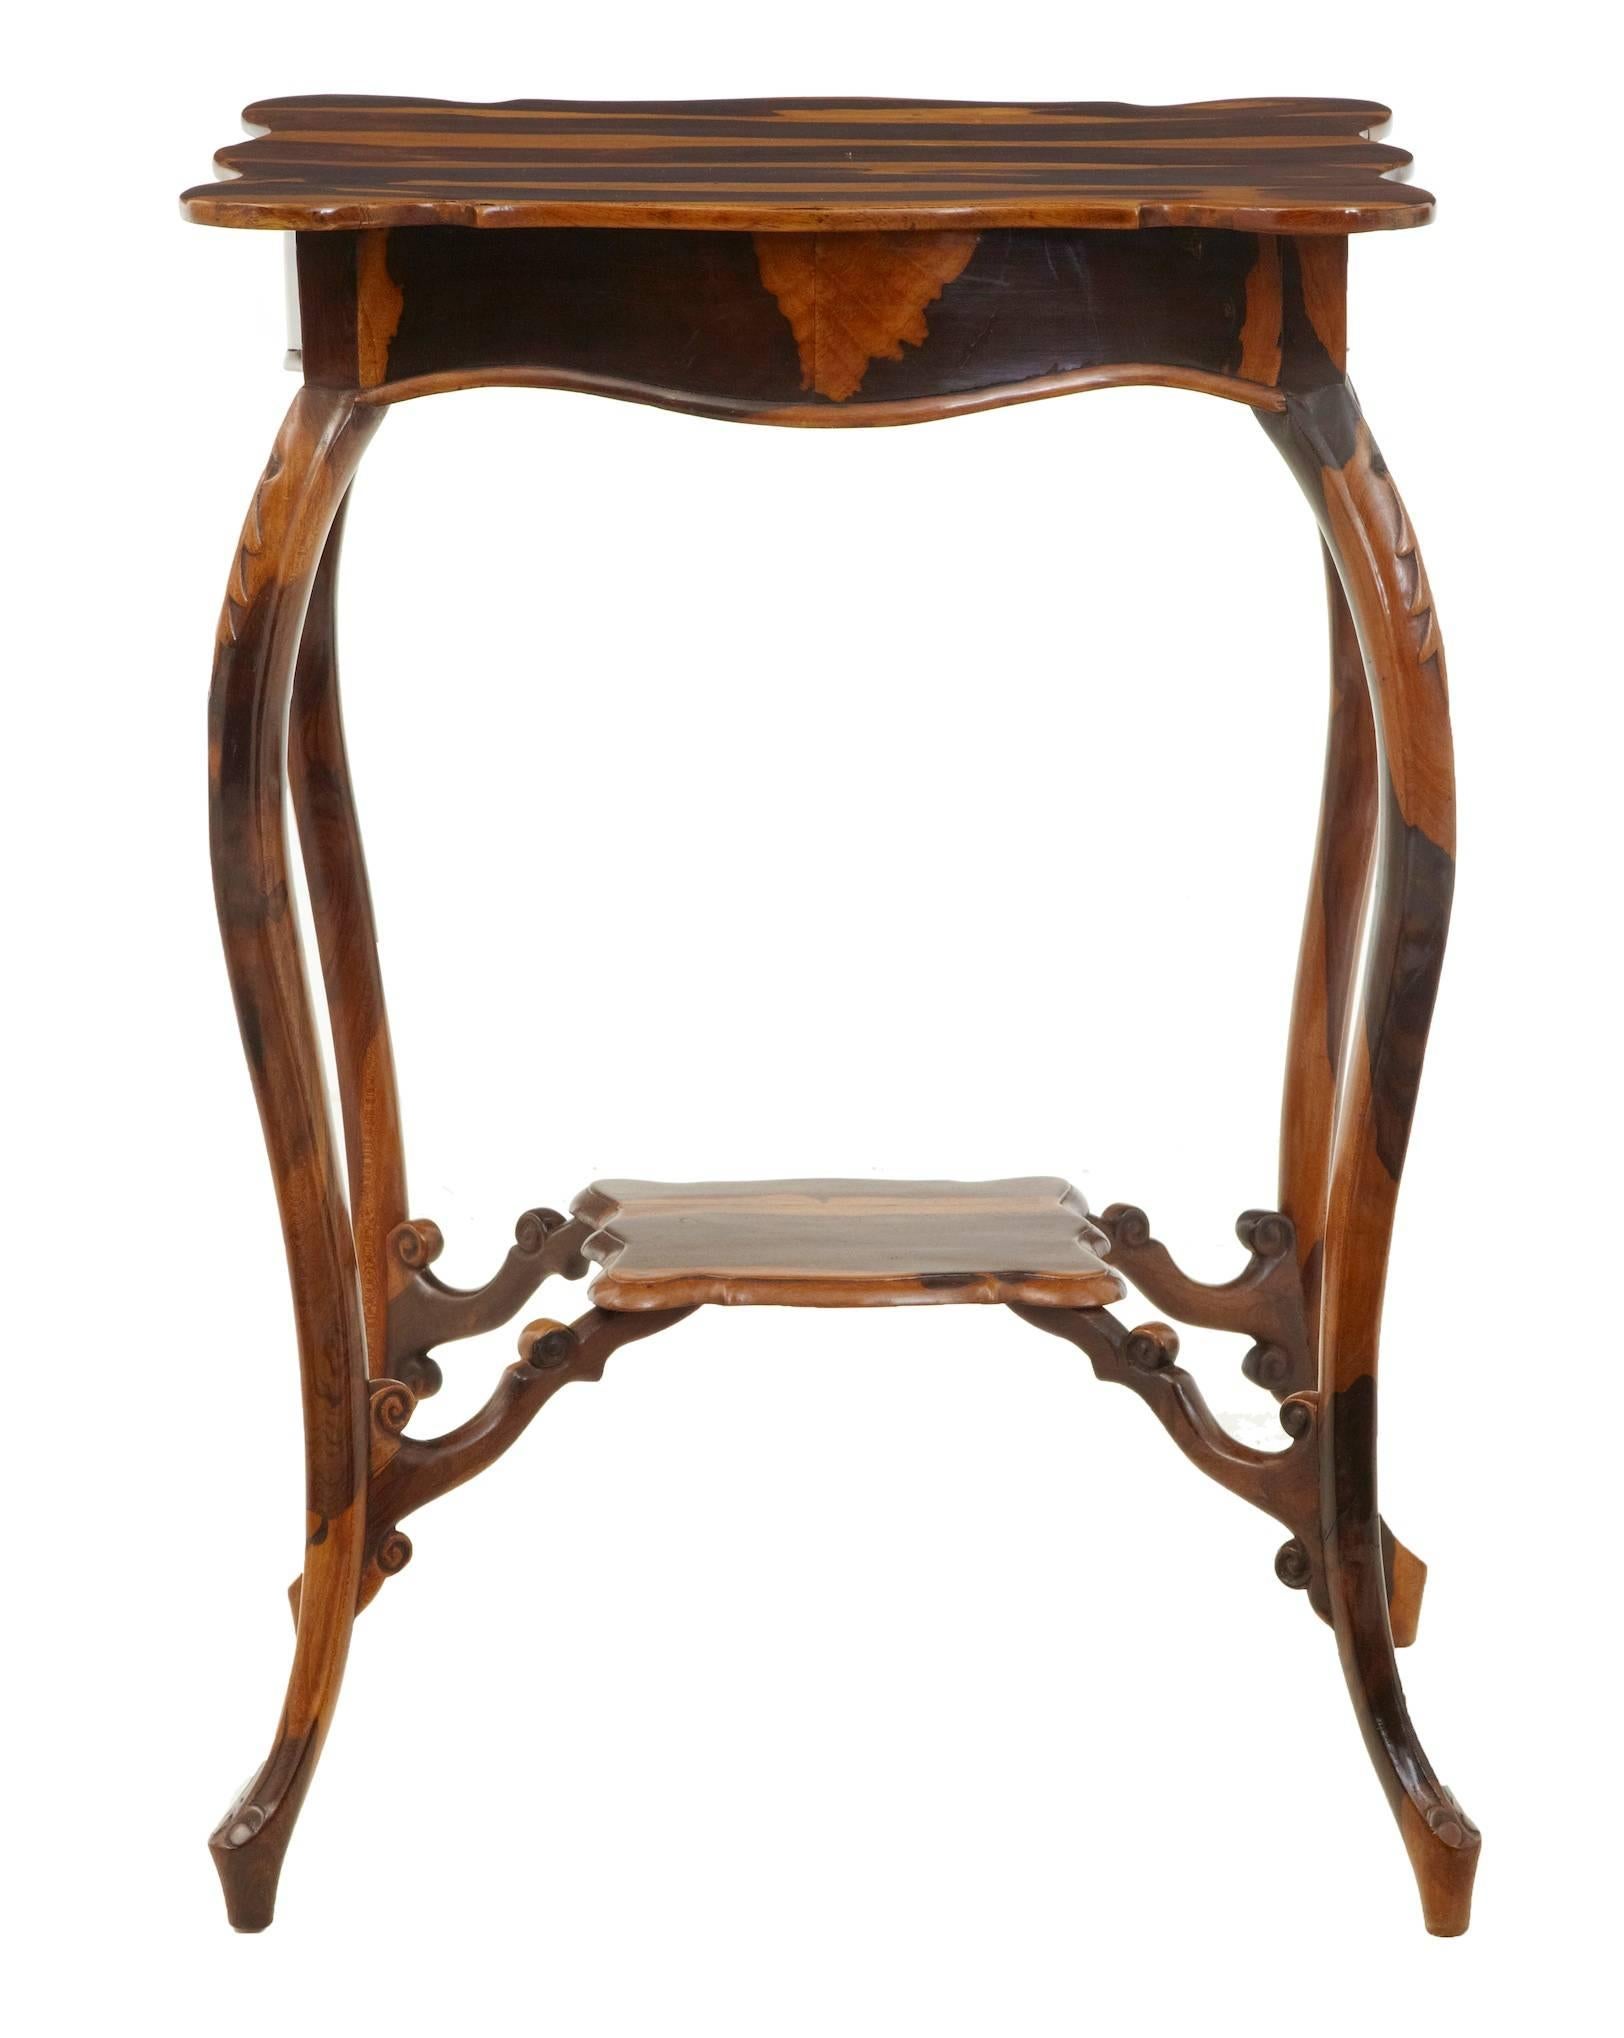 Rare and unusual table made from cordia wood, circa 1840.
Probably a unique table, made with striking cordia wood veneers on the top and carved legs in the solid.
Shaped top with a second tier support between the legs.

Some age splits to the